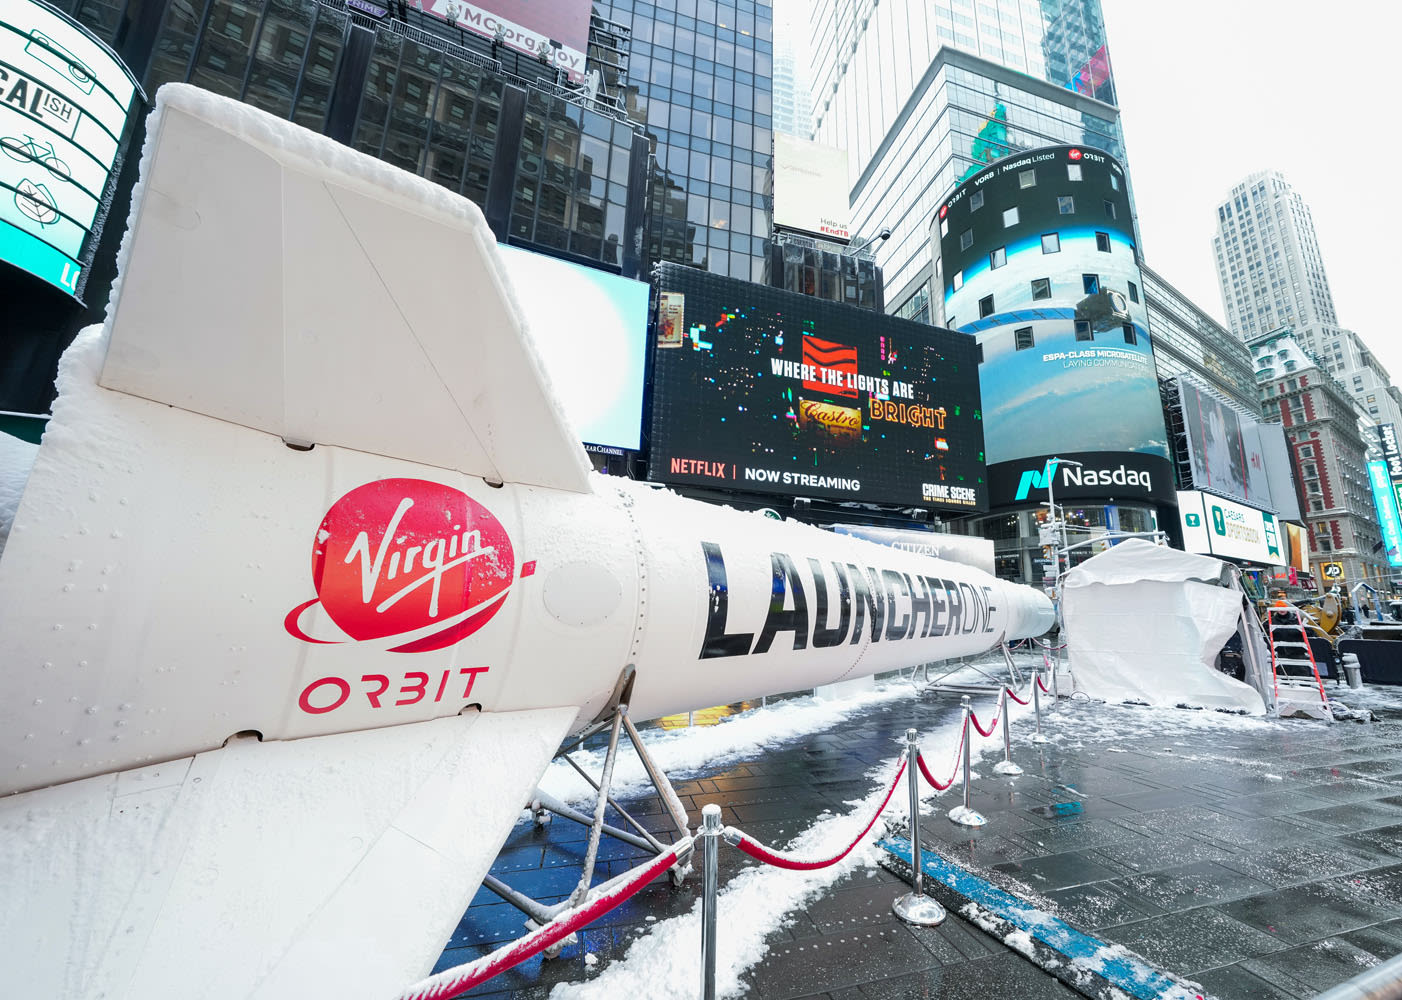 LauncherOne rocket in Times Square